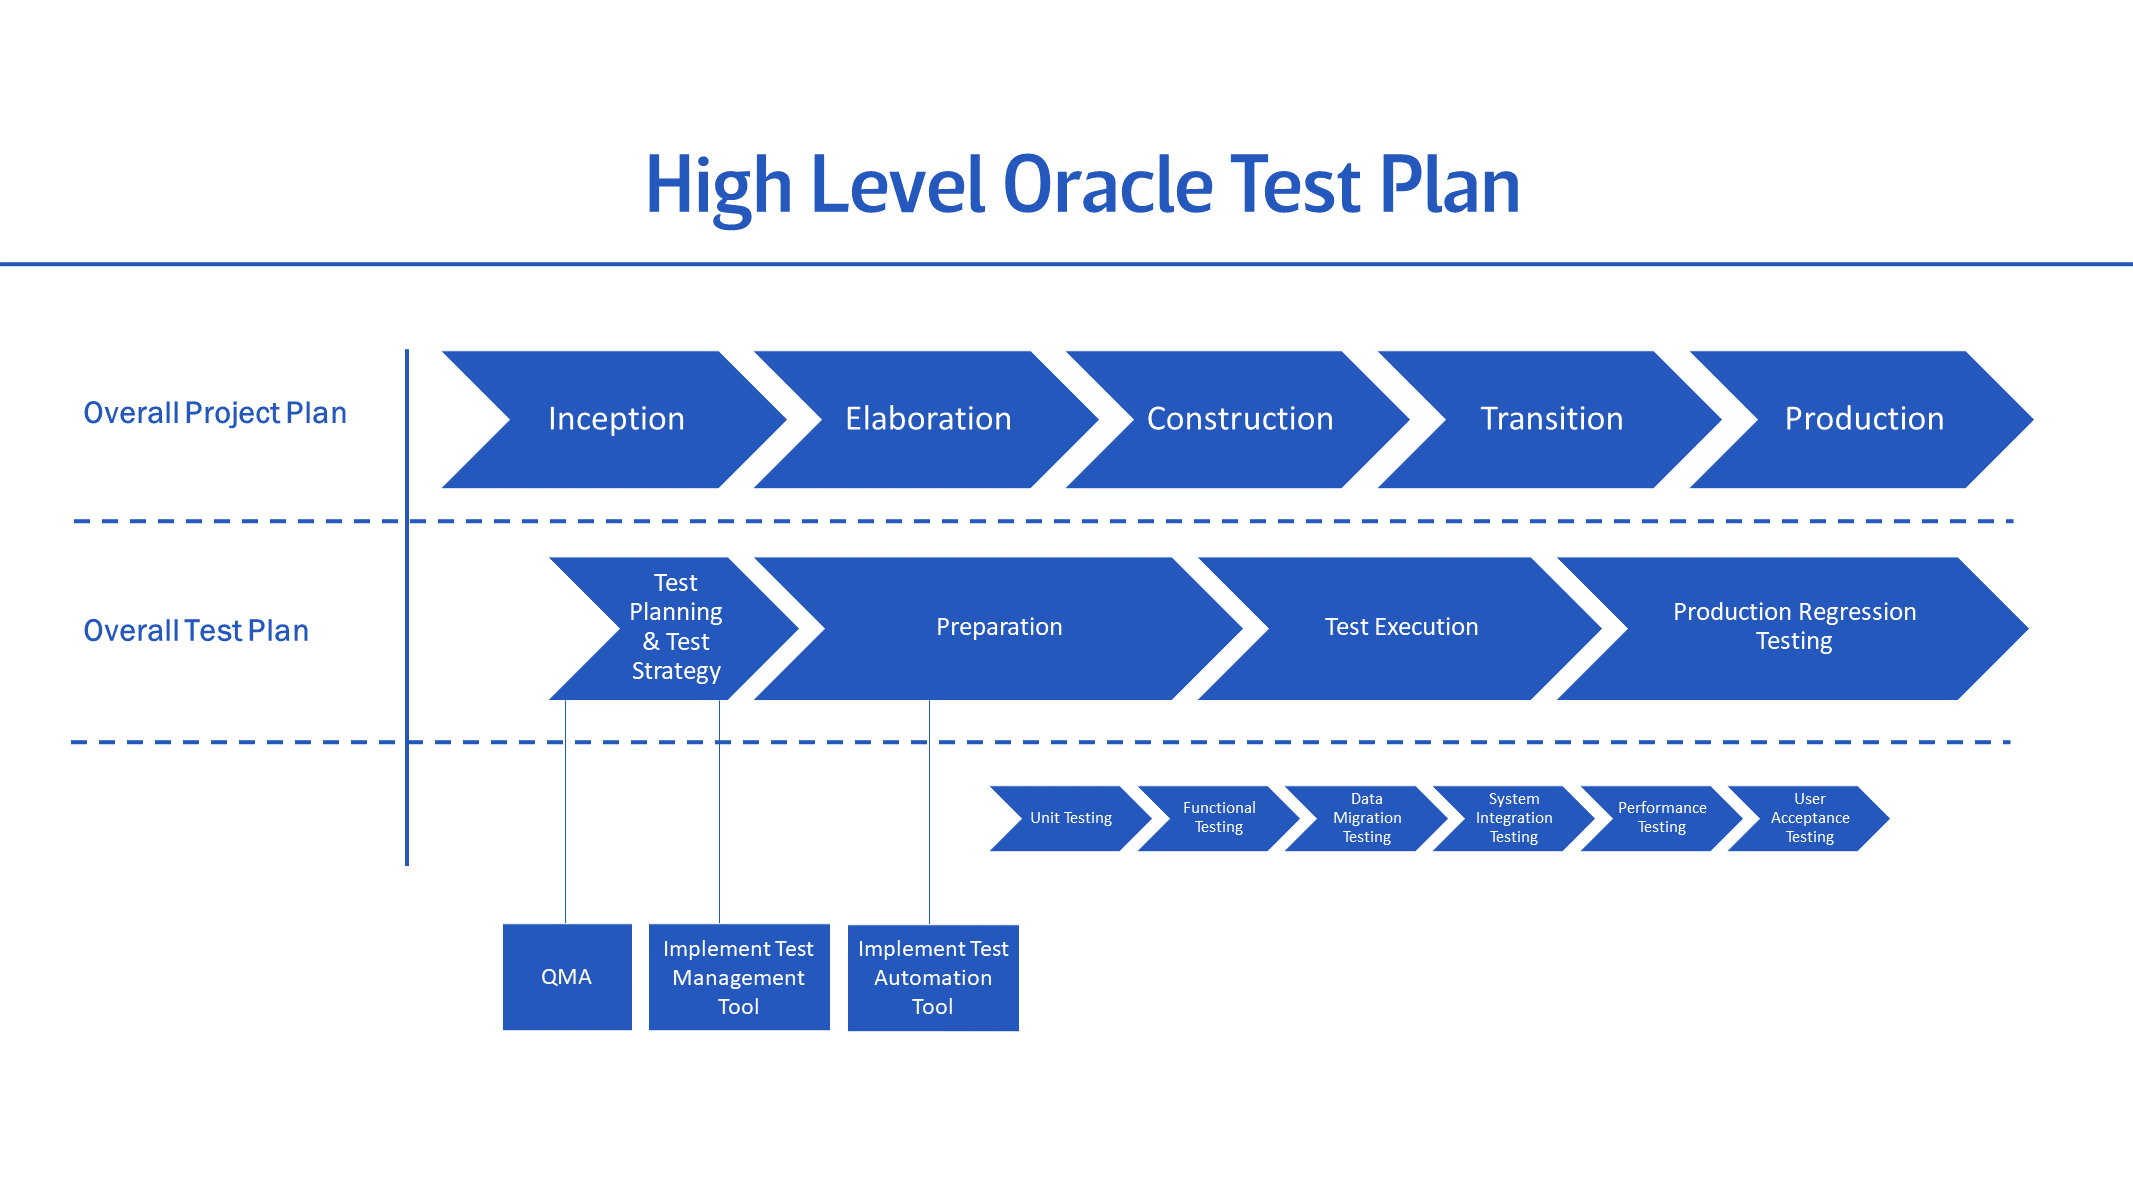 High Level Oracle Test Plan